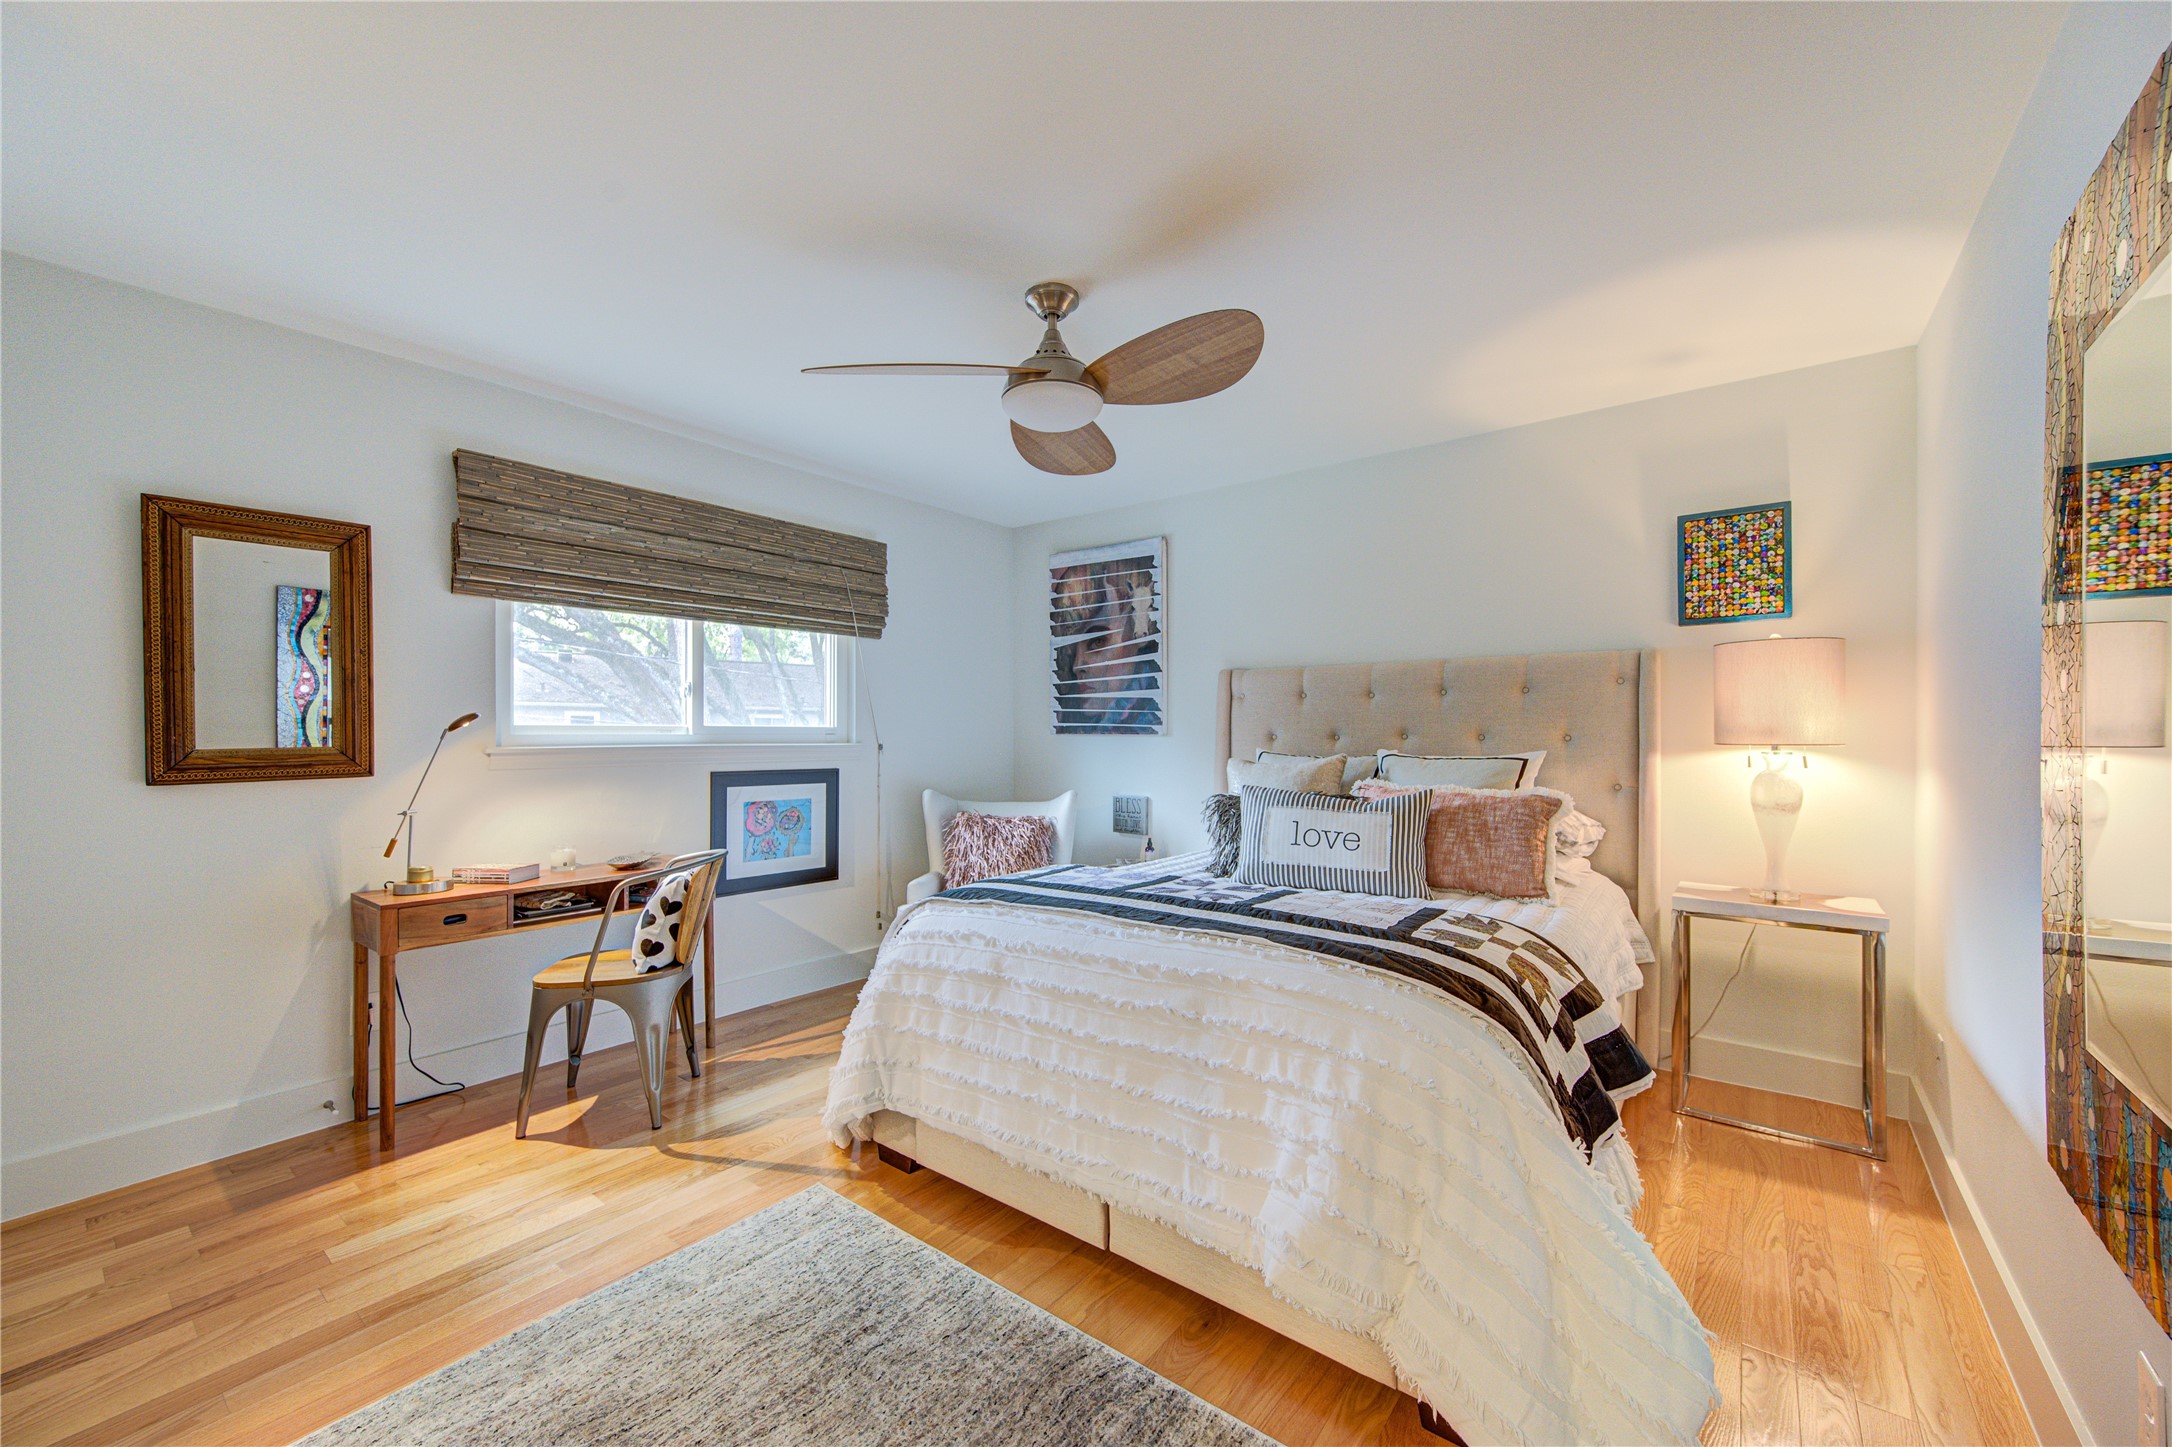 All the crown molding was removed upstairs with modern baseboards added to match the modern look of the downstairs. This spacious bedroom easily accommodates a queen bed with lots of extra space.